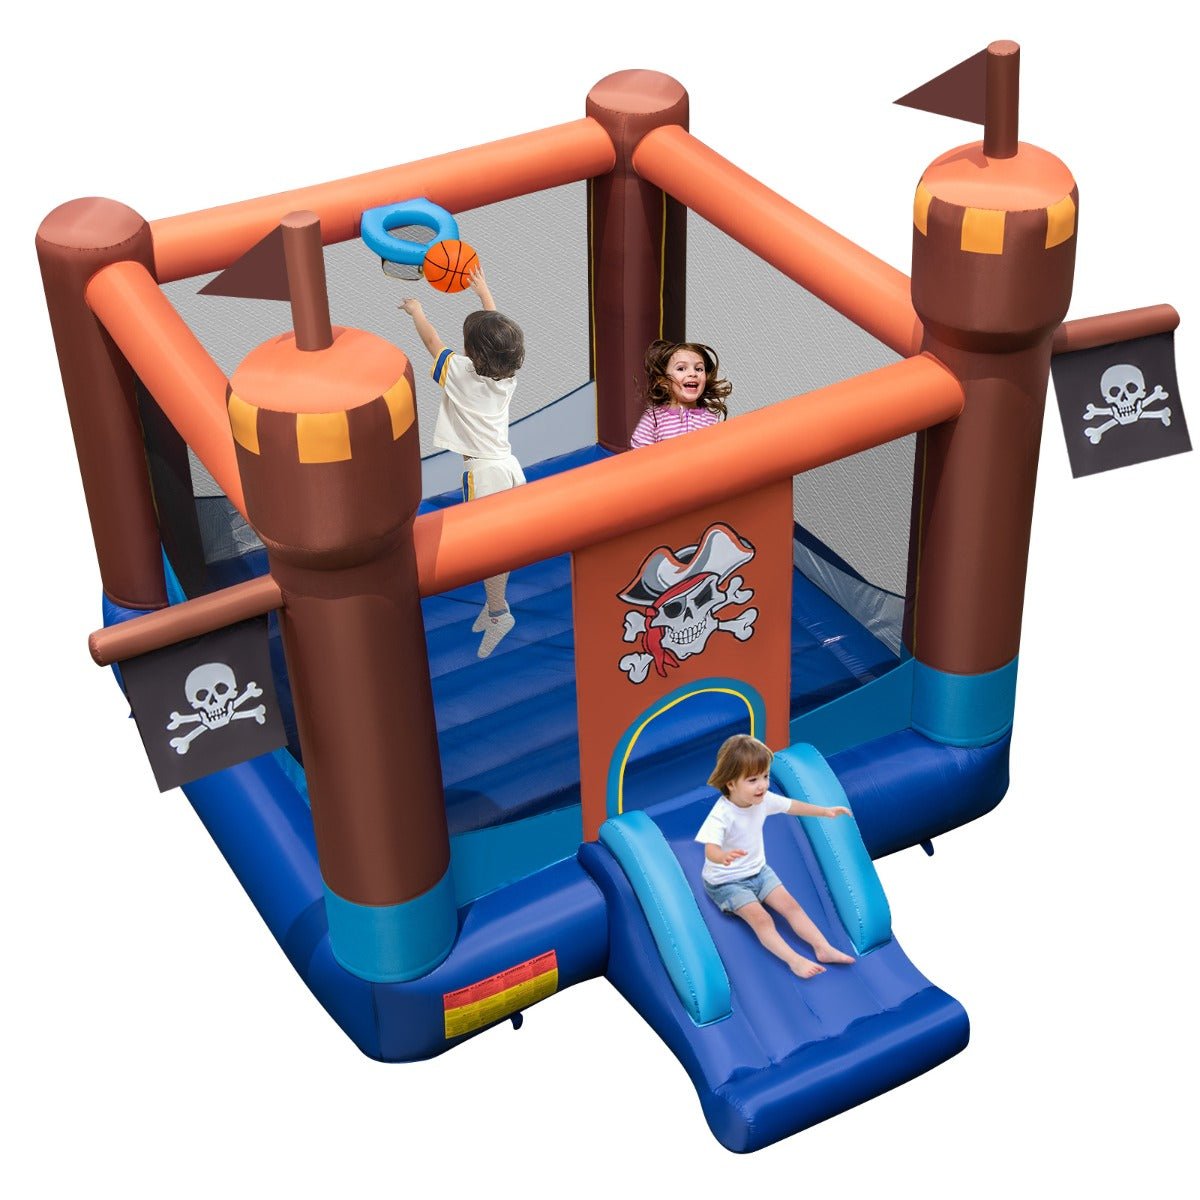 Inflatable Bounce Castle - Bounce, Play, and Shoot Hoops Outdoors